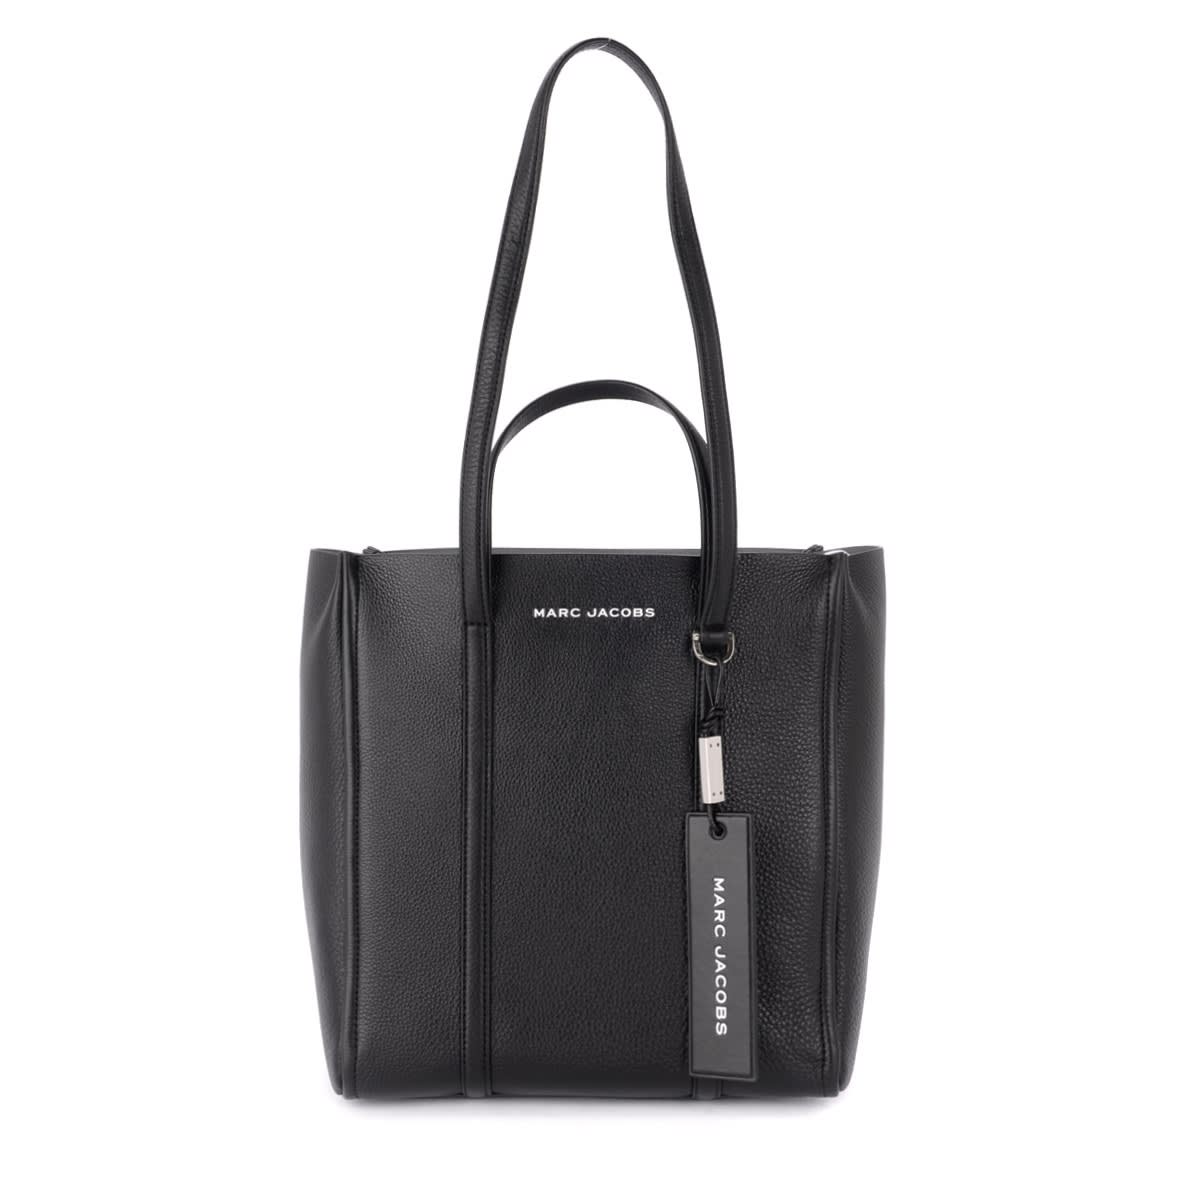 MARC JACOBS THE MARC JACOBS SHOULDER BAG MODEL THE TAG TOTE IN BLACK GRAINED LEATHER,11232565